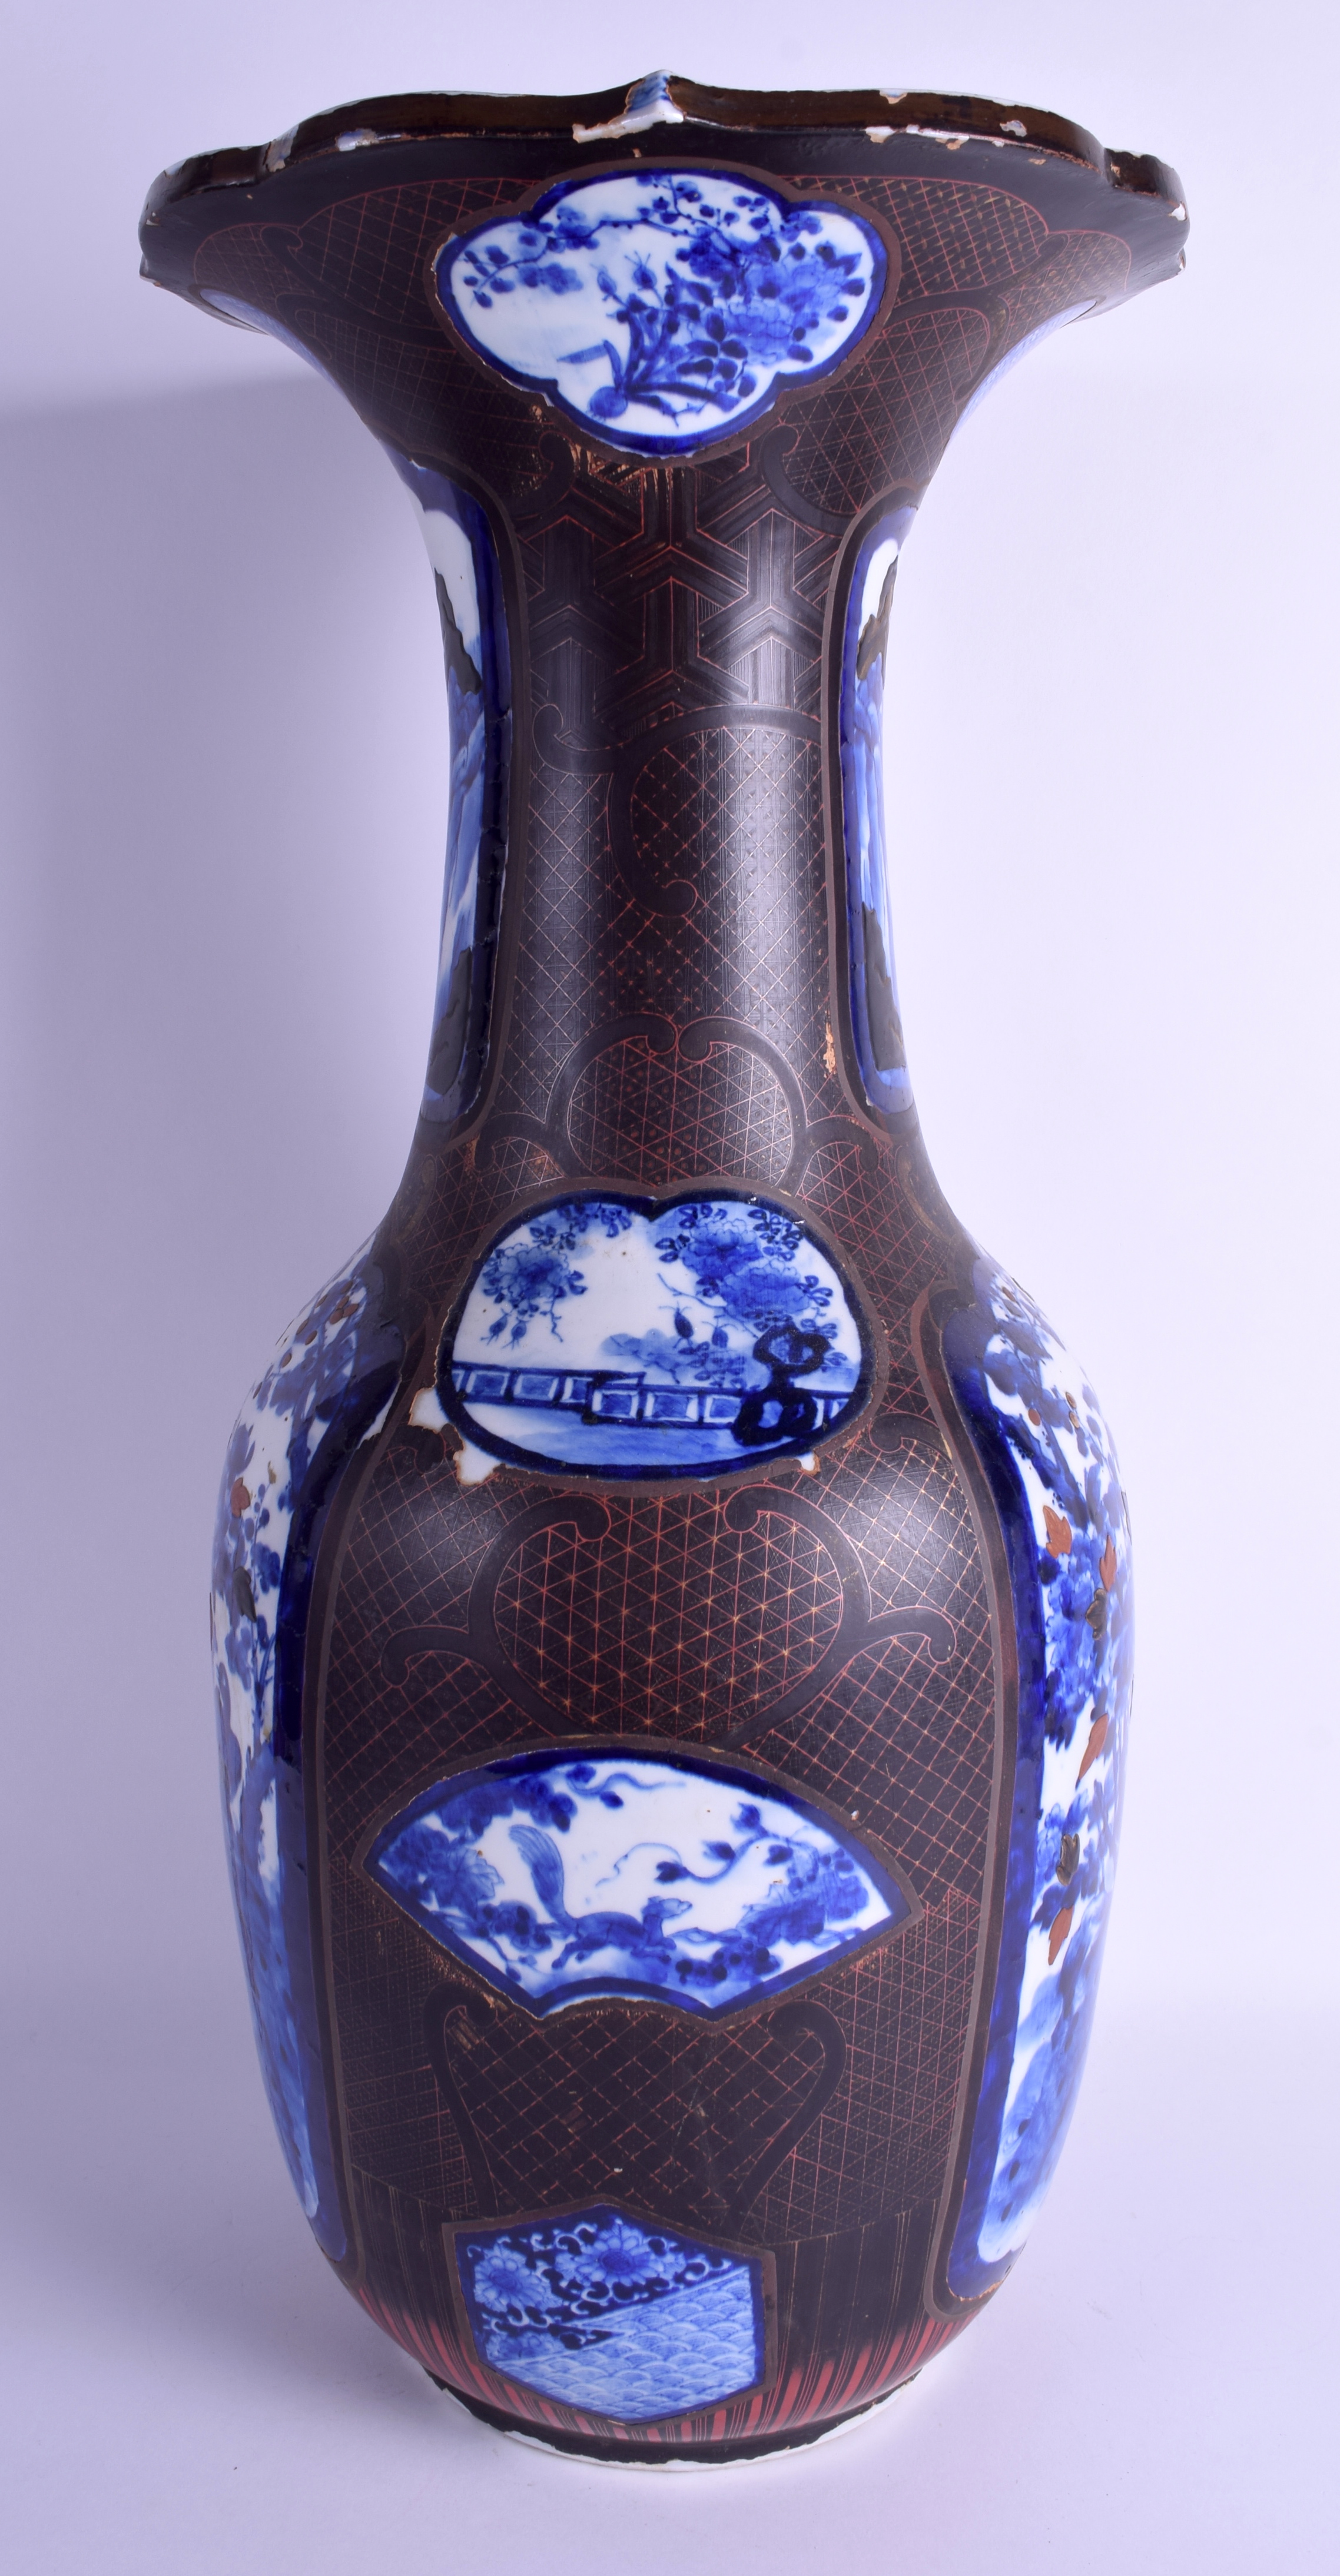 A LARGE 19TH CENTURY JAPANESE MEIJI PERIOD BLUE AND WHITE VASE lacquered with black and red motifs. - Image 4 of 6